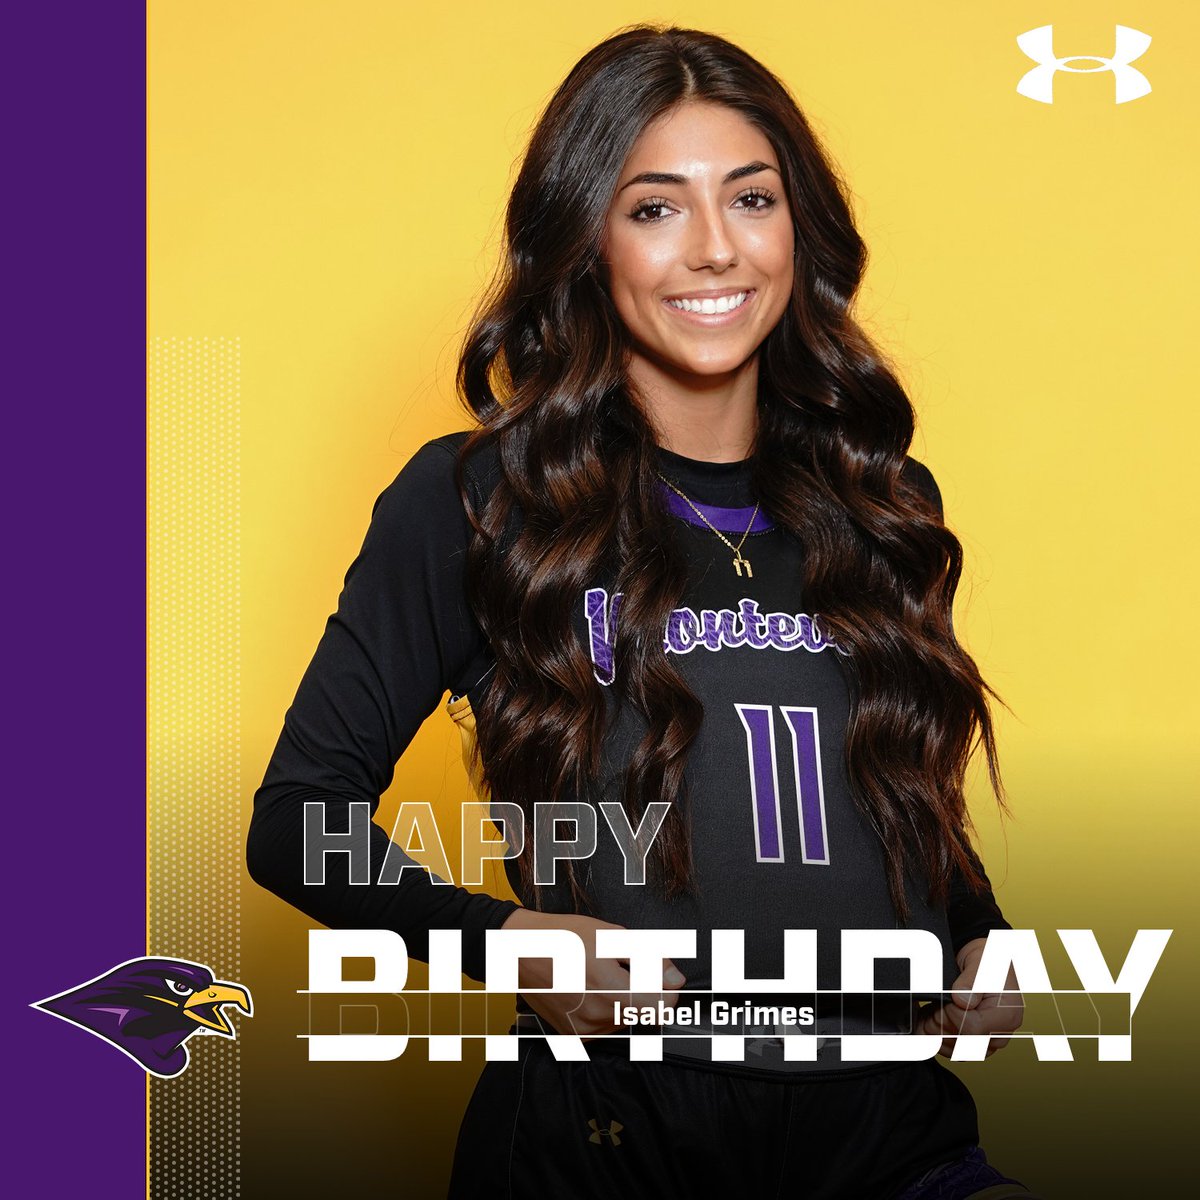 Falcon Nation, join us in wishing Isabel Grimes a very Happy Birthday!! 🥳🎂🎁💜